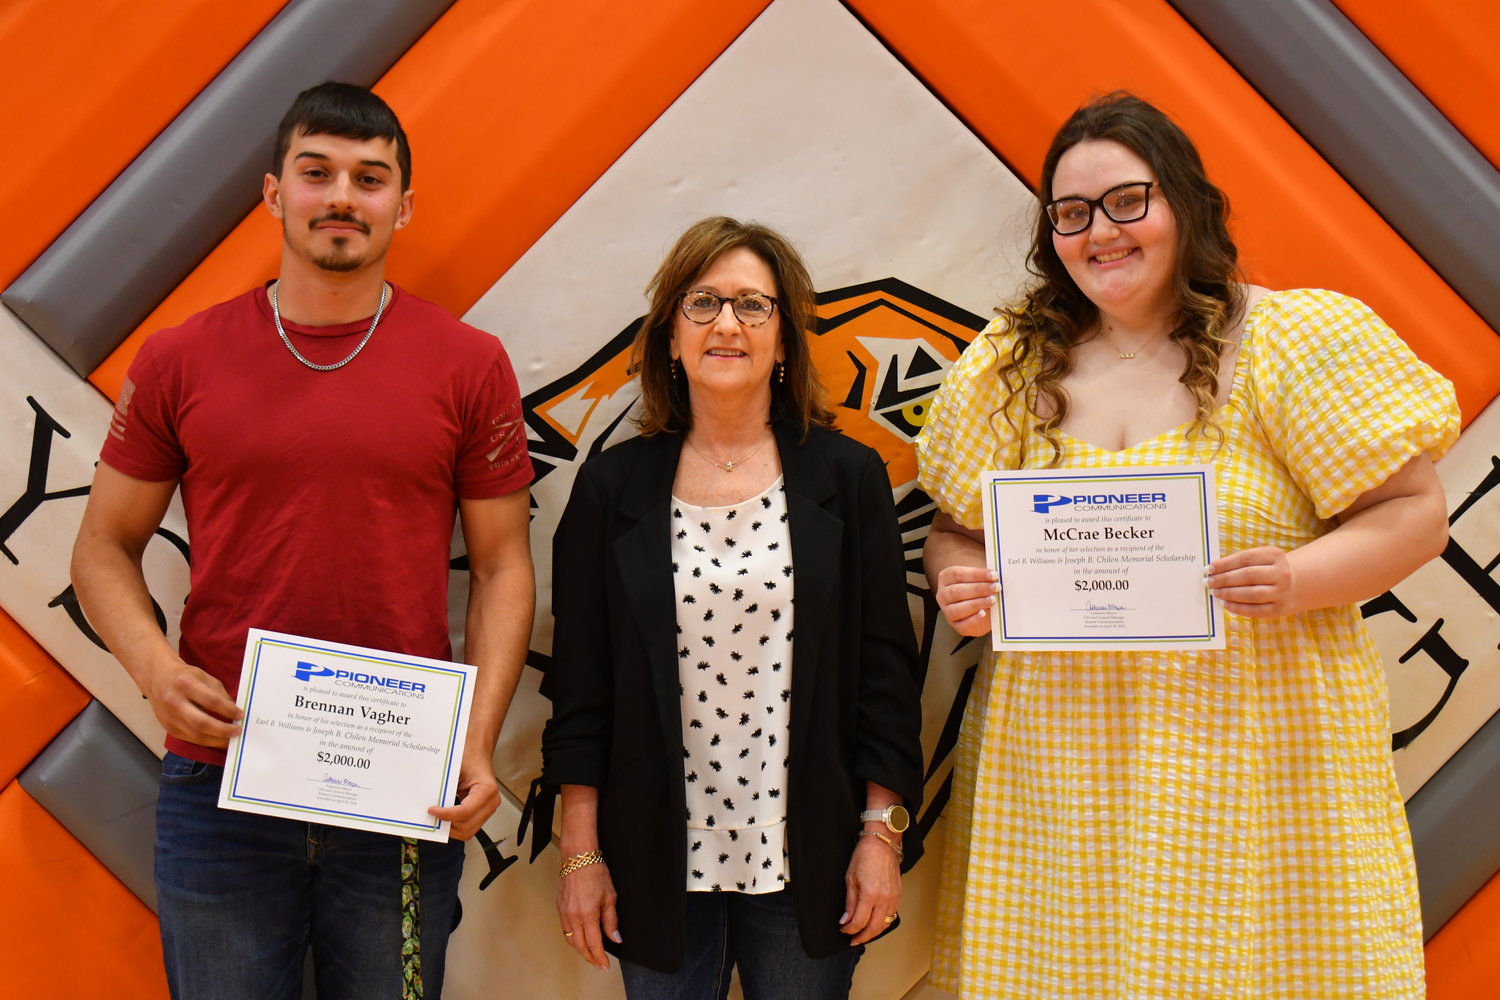 Senior Awards — Brennan Vagher and McCrae Becker were given the Earl B. William and Joseph B. Chilen Memorial Scholarship by Mary Kay Malone on Friday, May 13, 2022.